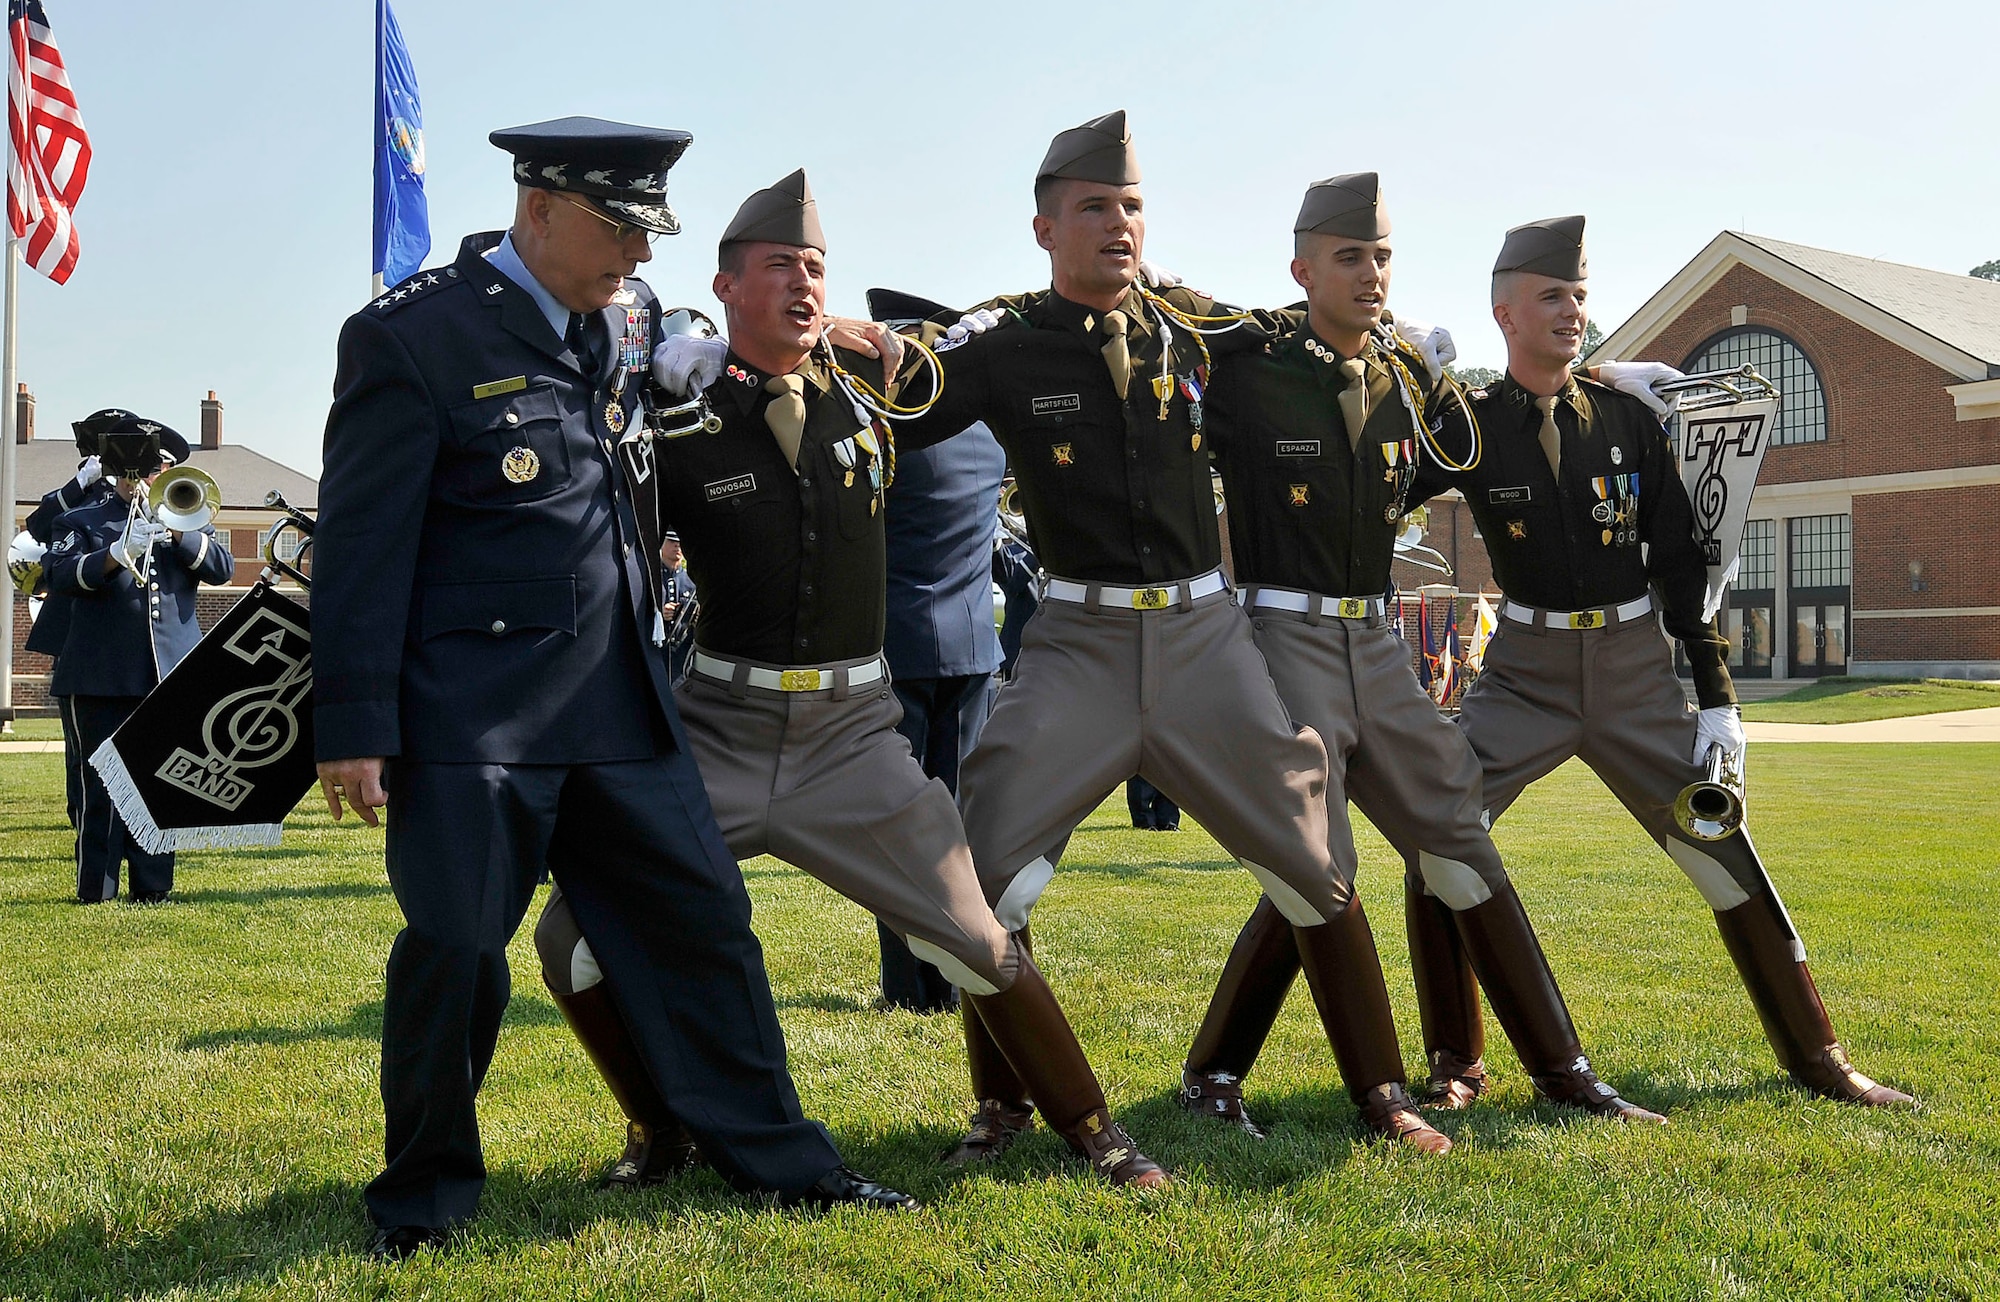 Air Force Chief of Staff Gen. T. Michael Moseley joins cadets from his alma mater, Texas A&M University, during his retirement ceremony July 11 at Bolling Air Force Base, D.C. (U.S. Air Force photo/Scott M. Ash)